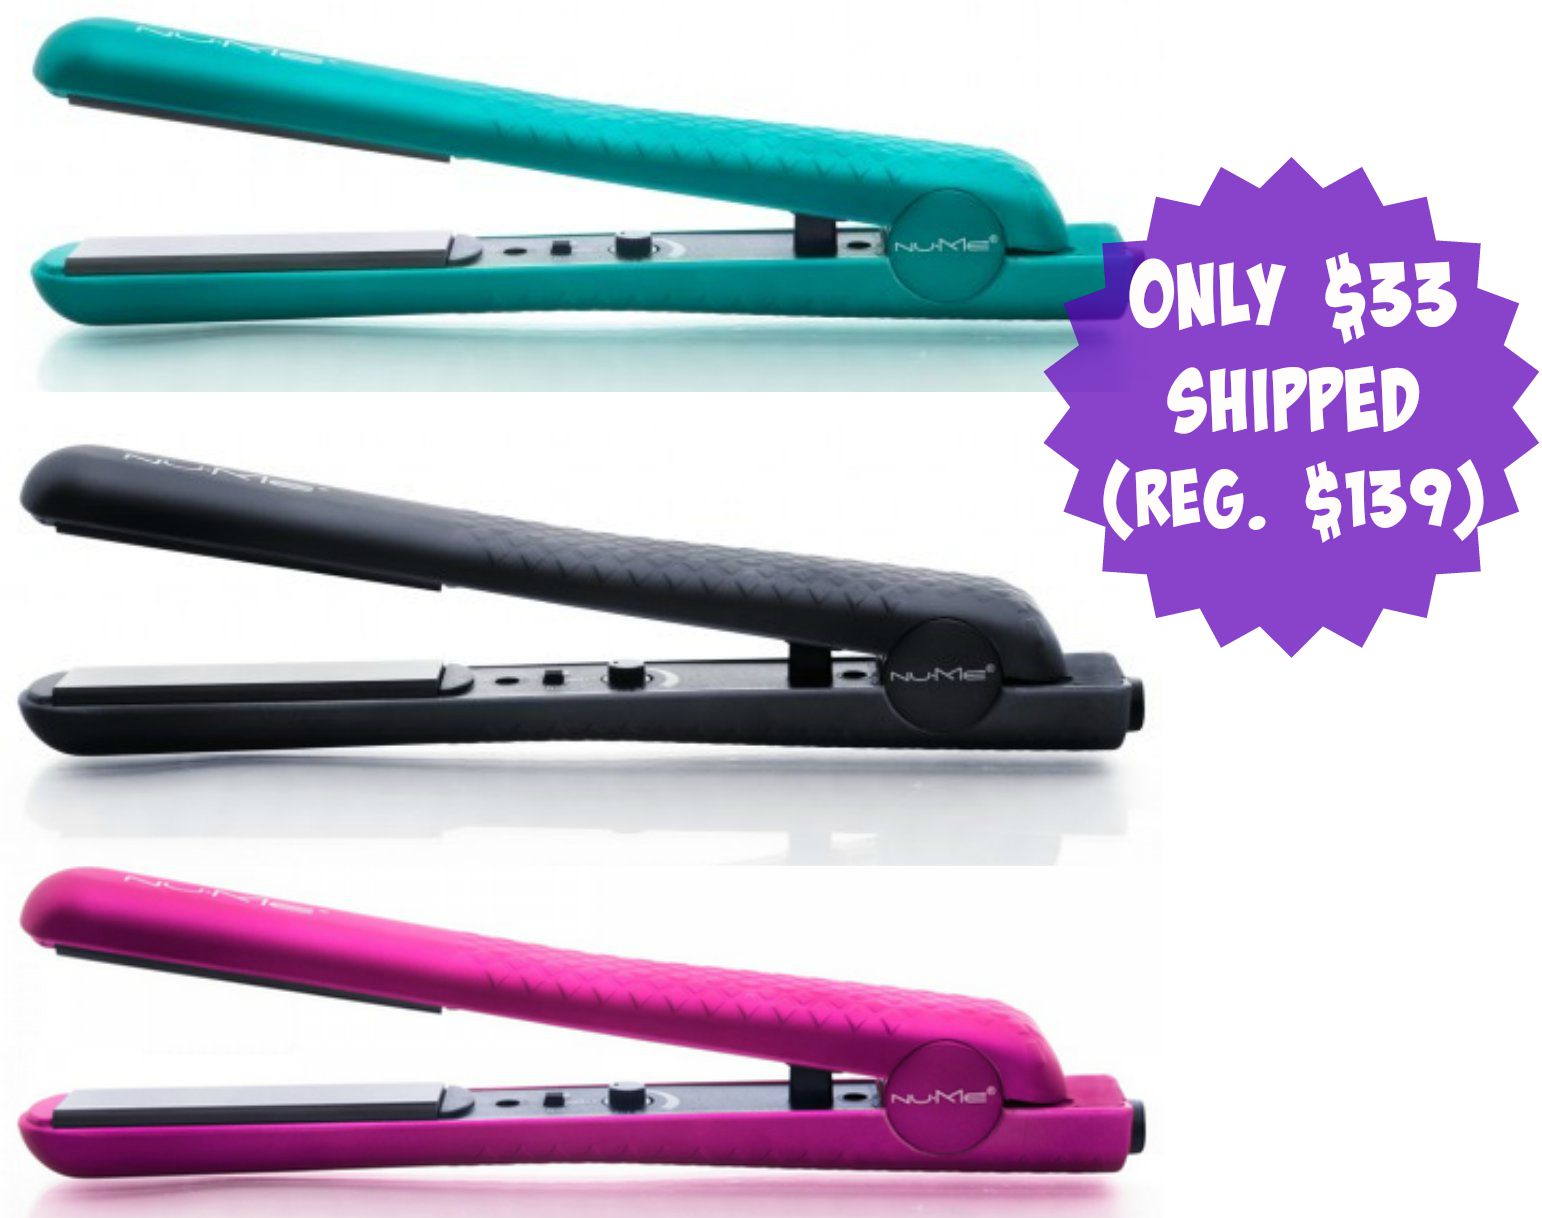 NuMe.com: Silhouette Flat Iron Only $33 Shipped (Reg. $139) + Free Travel Size Shampoo & Conditioner